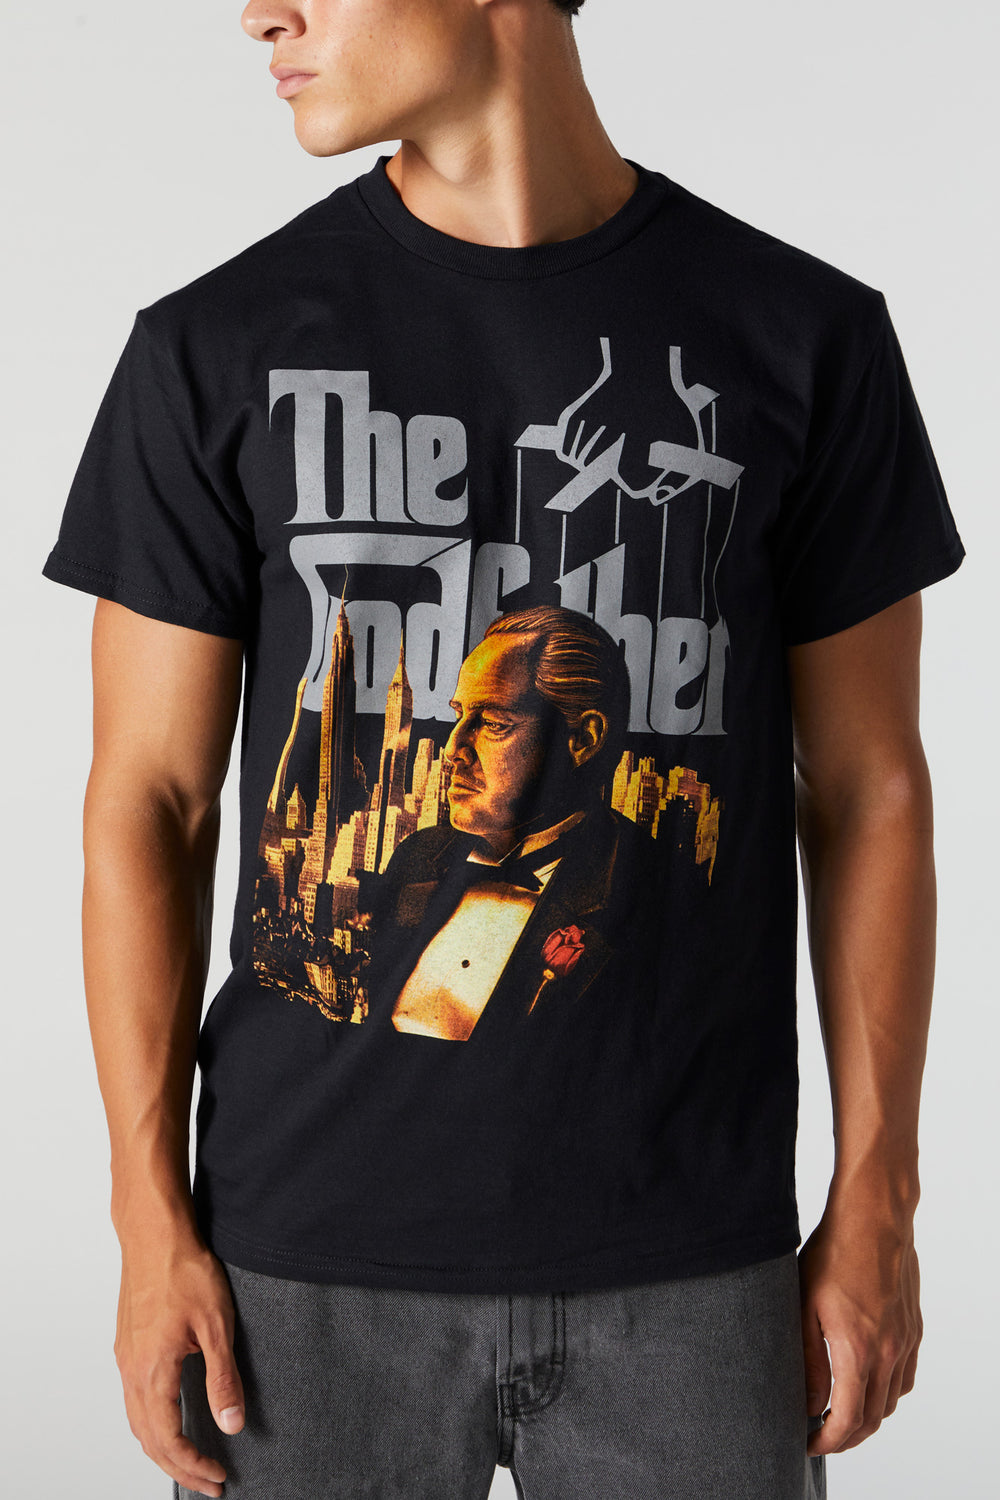 The Godfather Graphic T-Shirt The Godfather Graphic T-Shirt 2